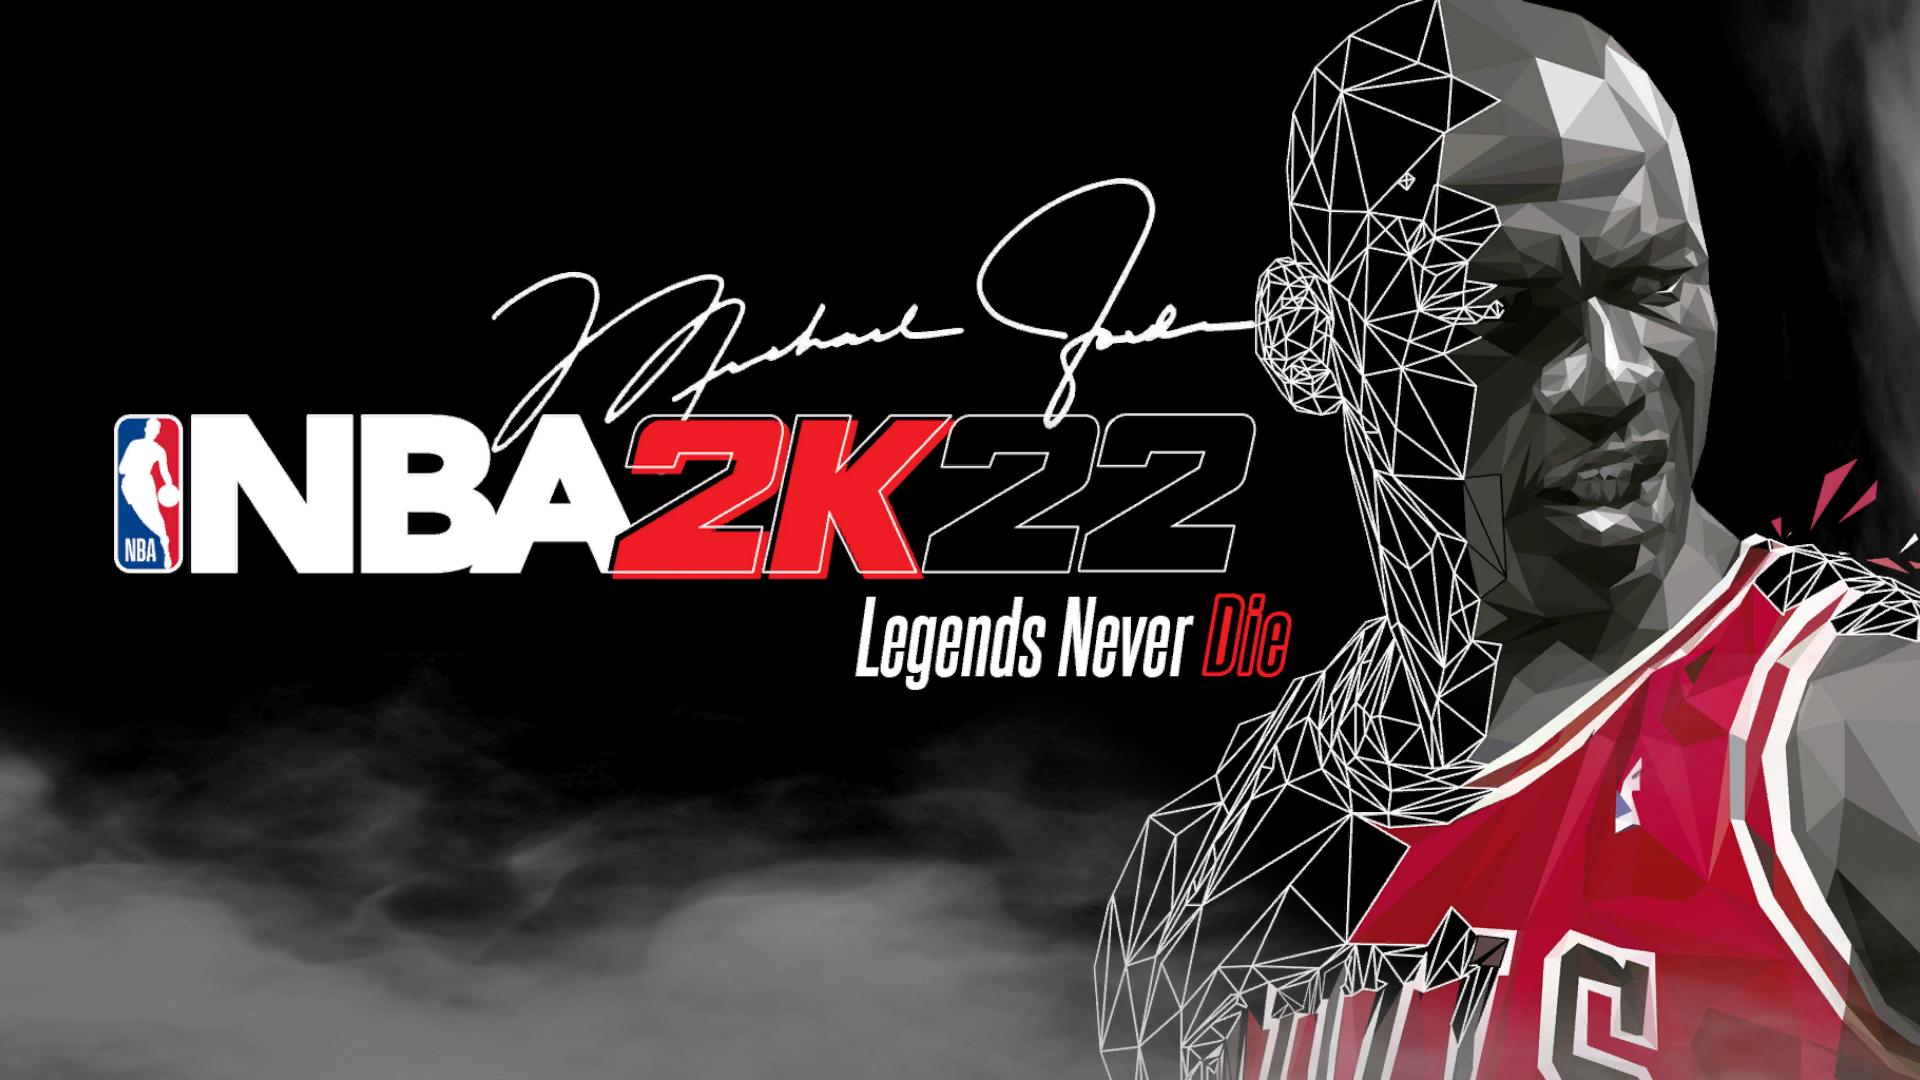 The cover art for NBA 2K22 features Michael Jordan, who is depicted in a low poly style. - NBA